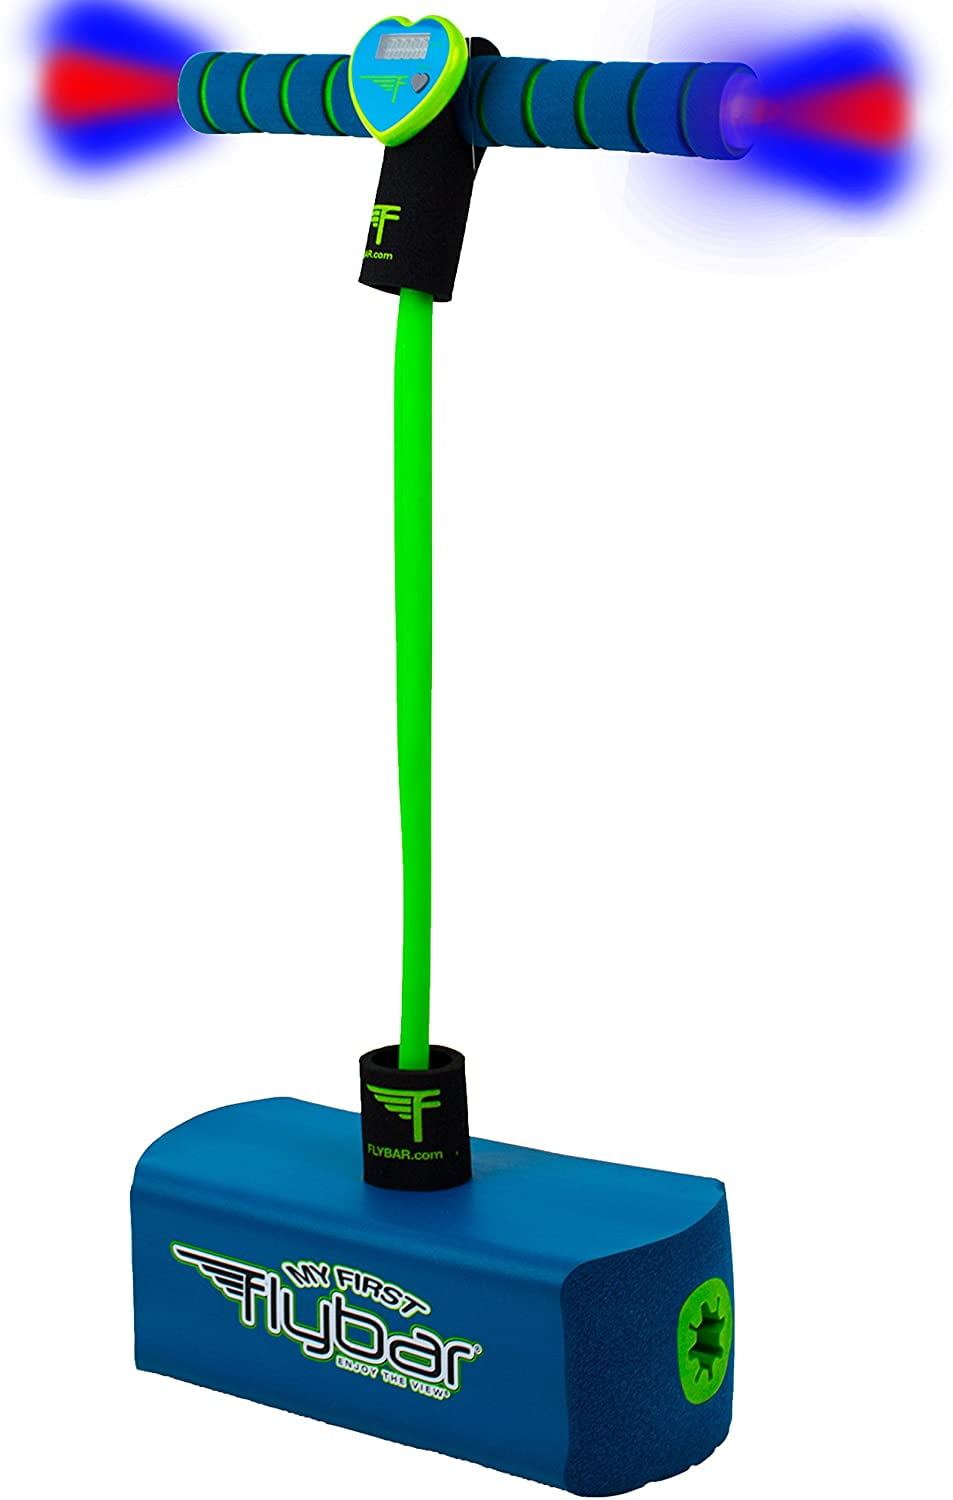 Details about   Bungee Hopper Soft Pogo Stick Jump N Bounce Space Balance Exercise Toy Gift Kids 